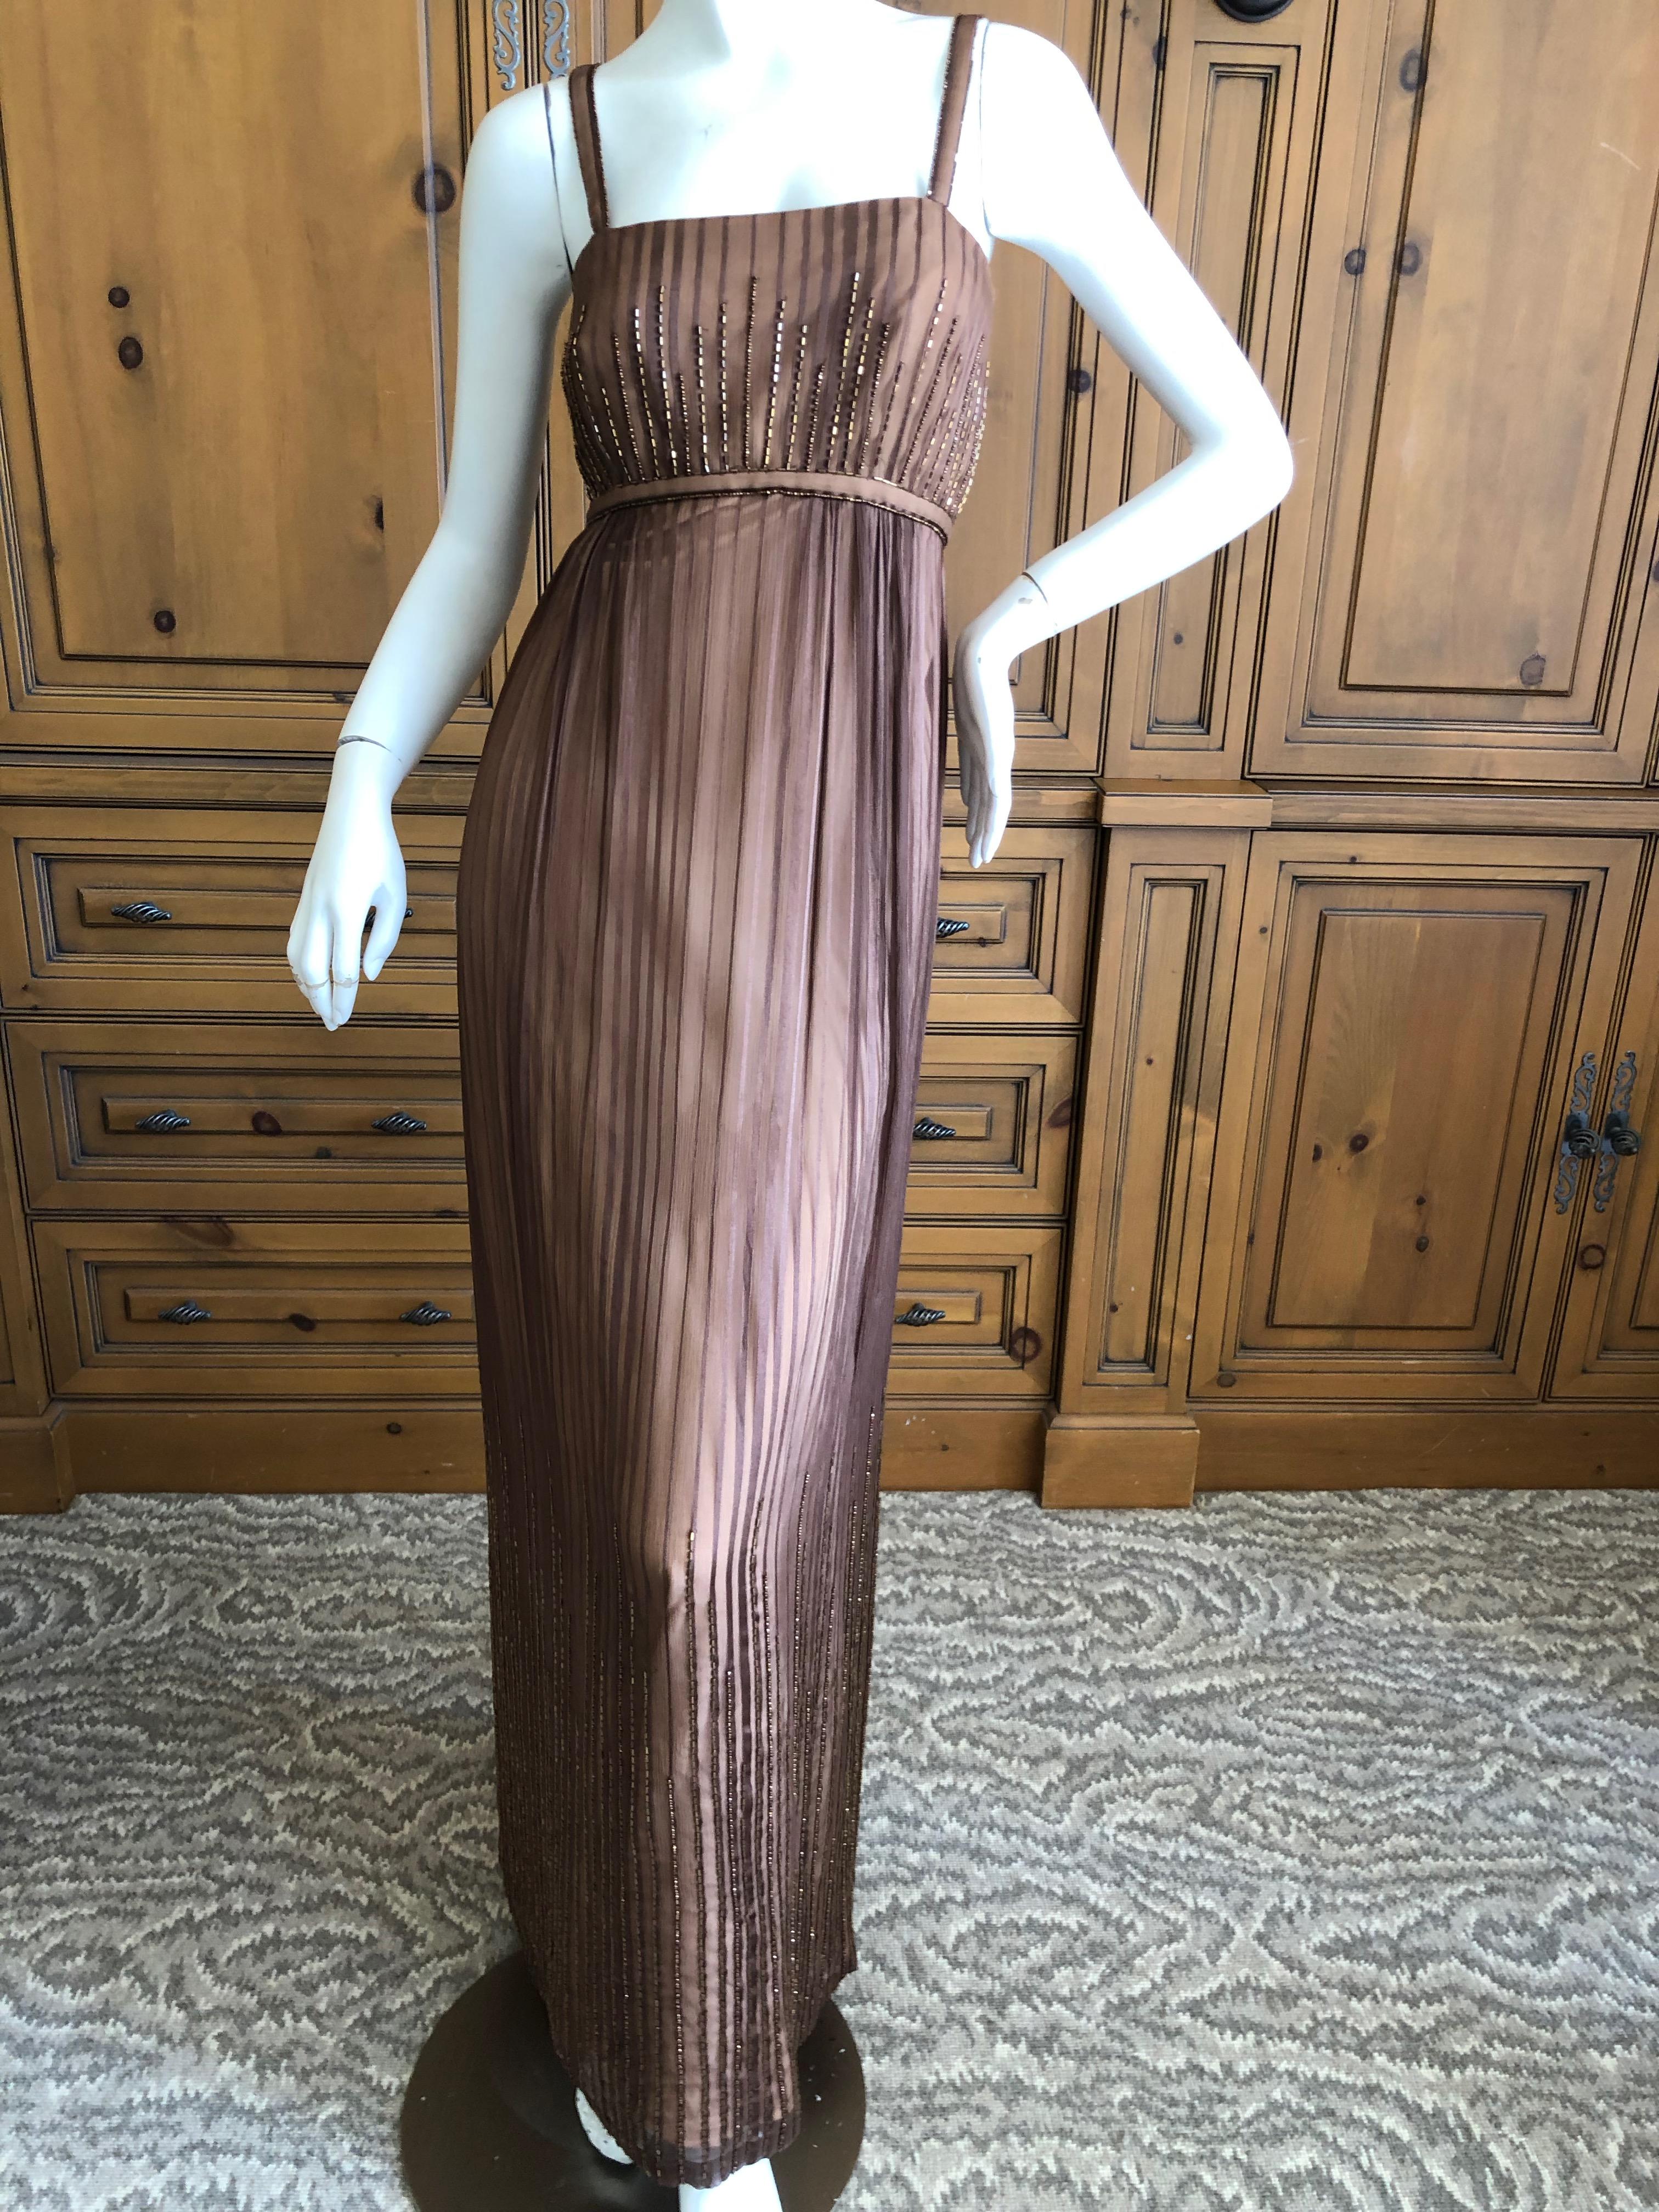 Halston for Martha Park Ave 1970's Beaded Chiffon Empire Dress with Collar Cape.
Bugle bead details o the dress match the bead trim on the collar , which has two long trailing scarves, so chic.
There is no size label
Bust 34